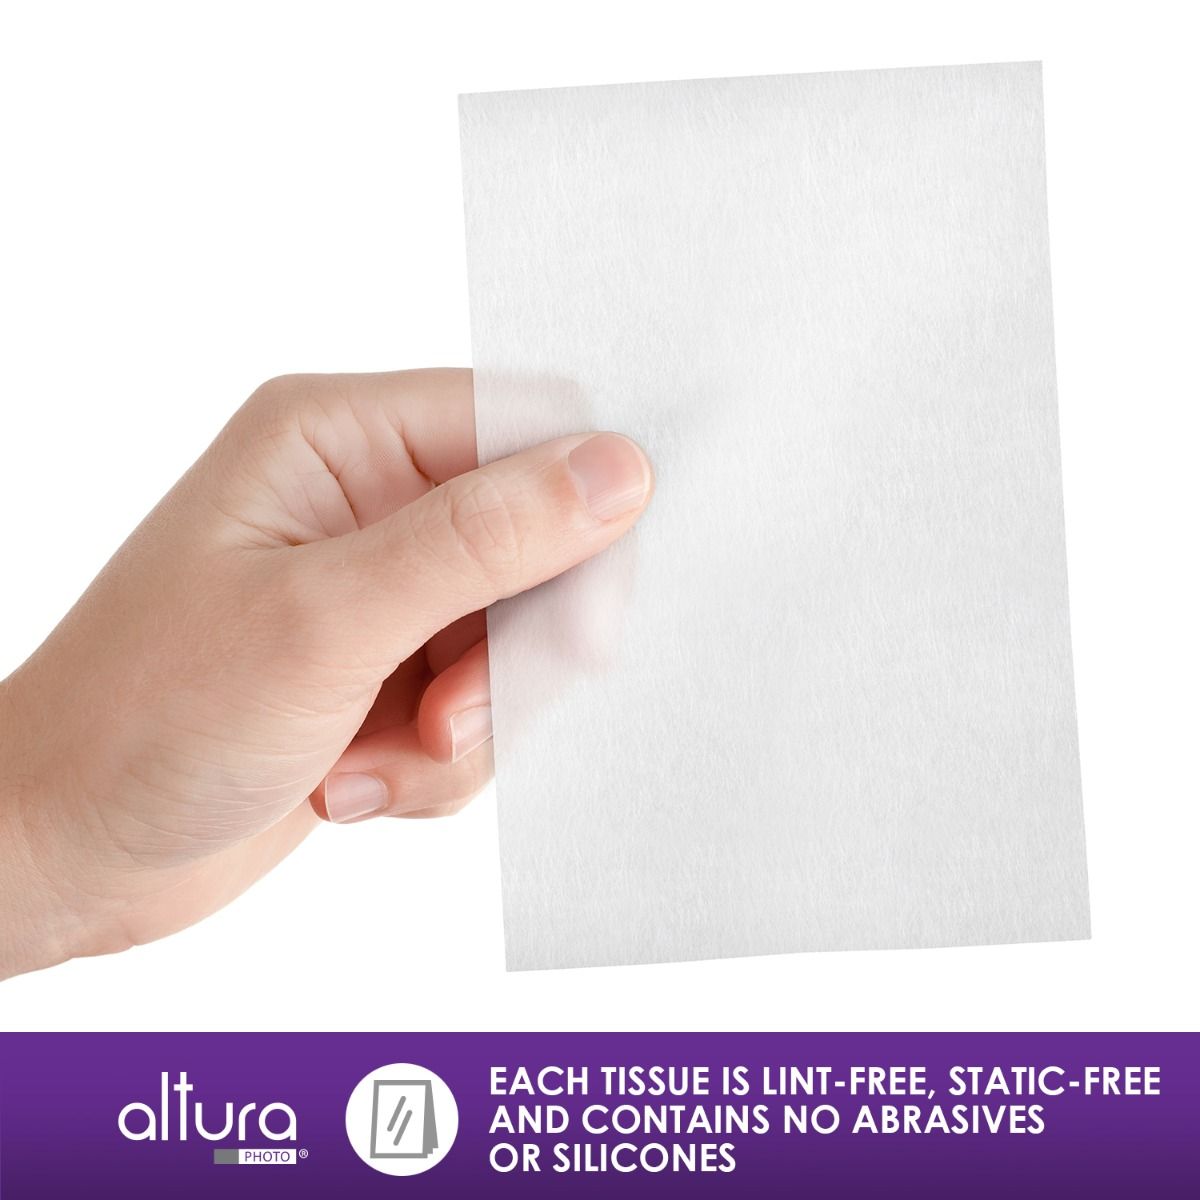 250 Sheets / 5 Booklets) - Altura Photo Lens Cleaning Tissue Paper